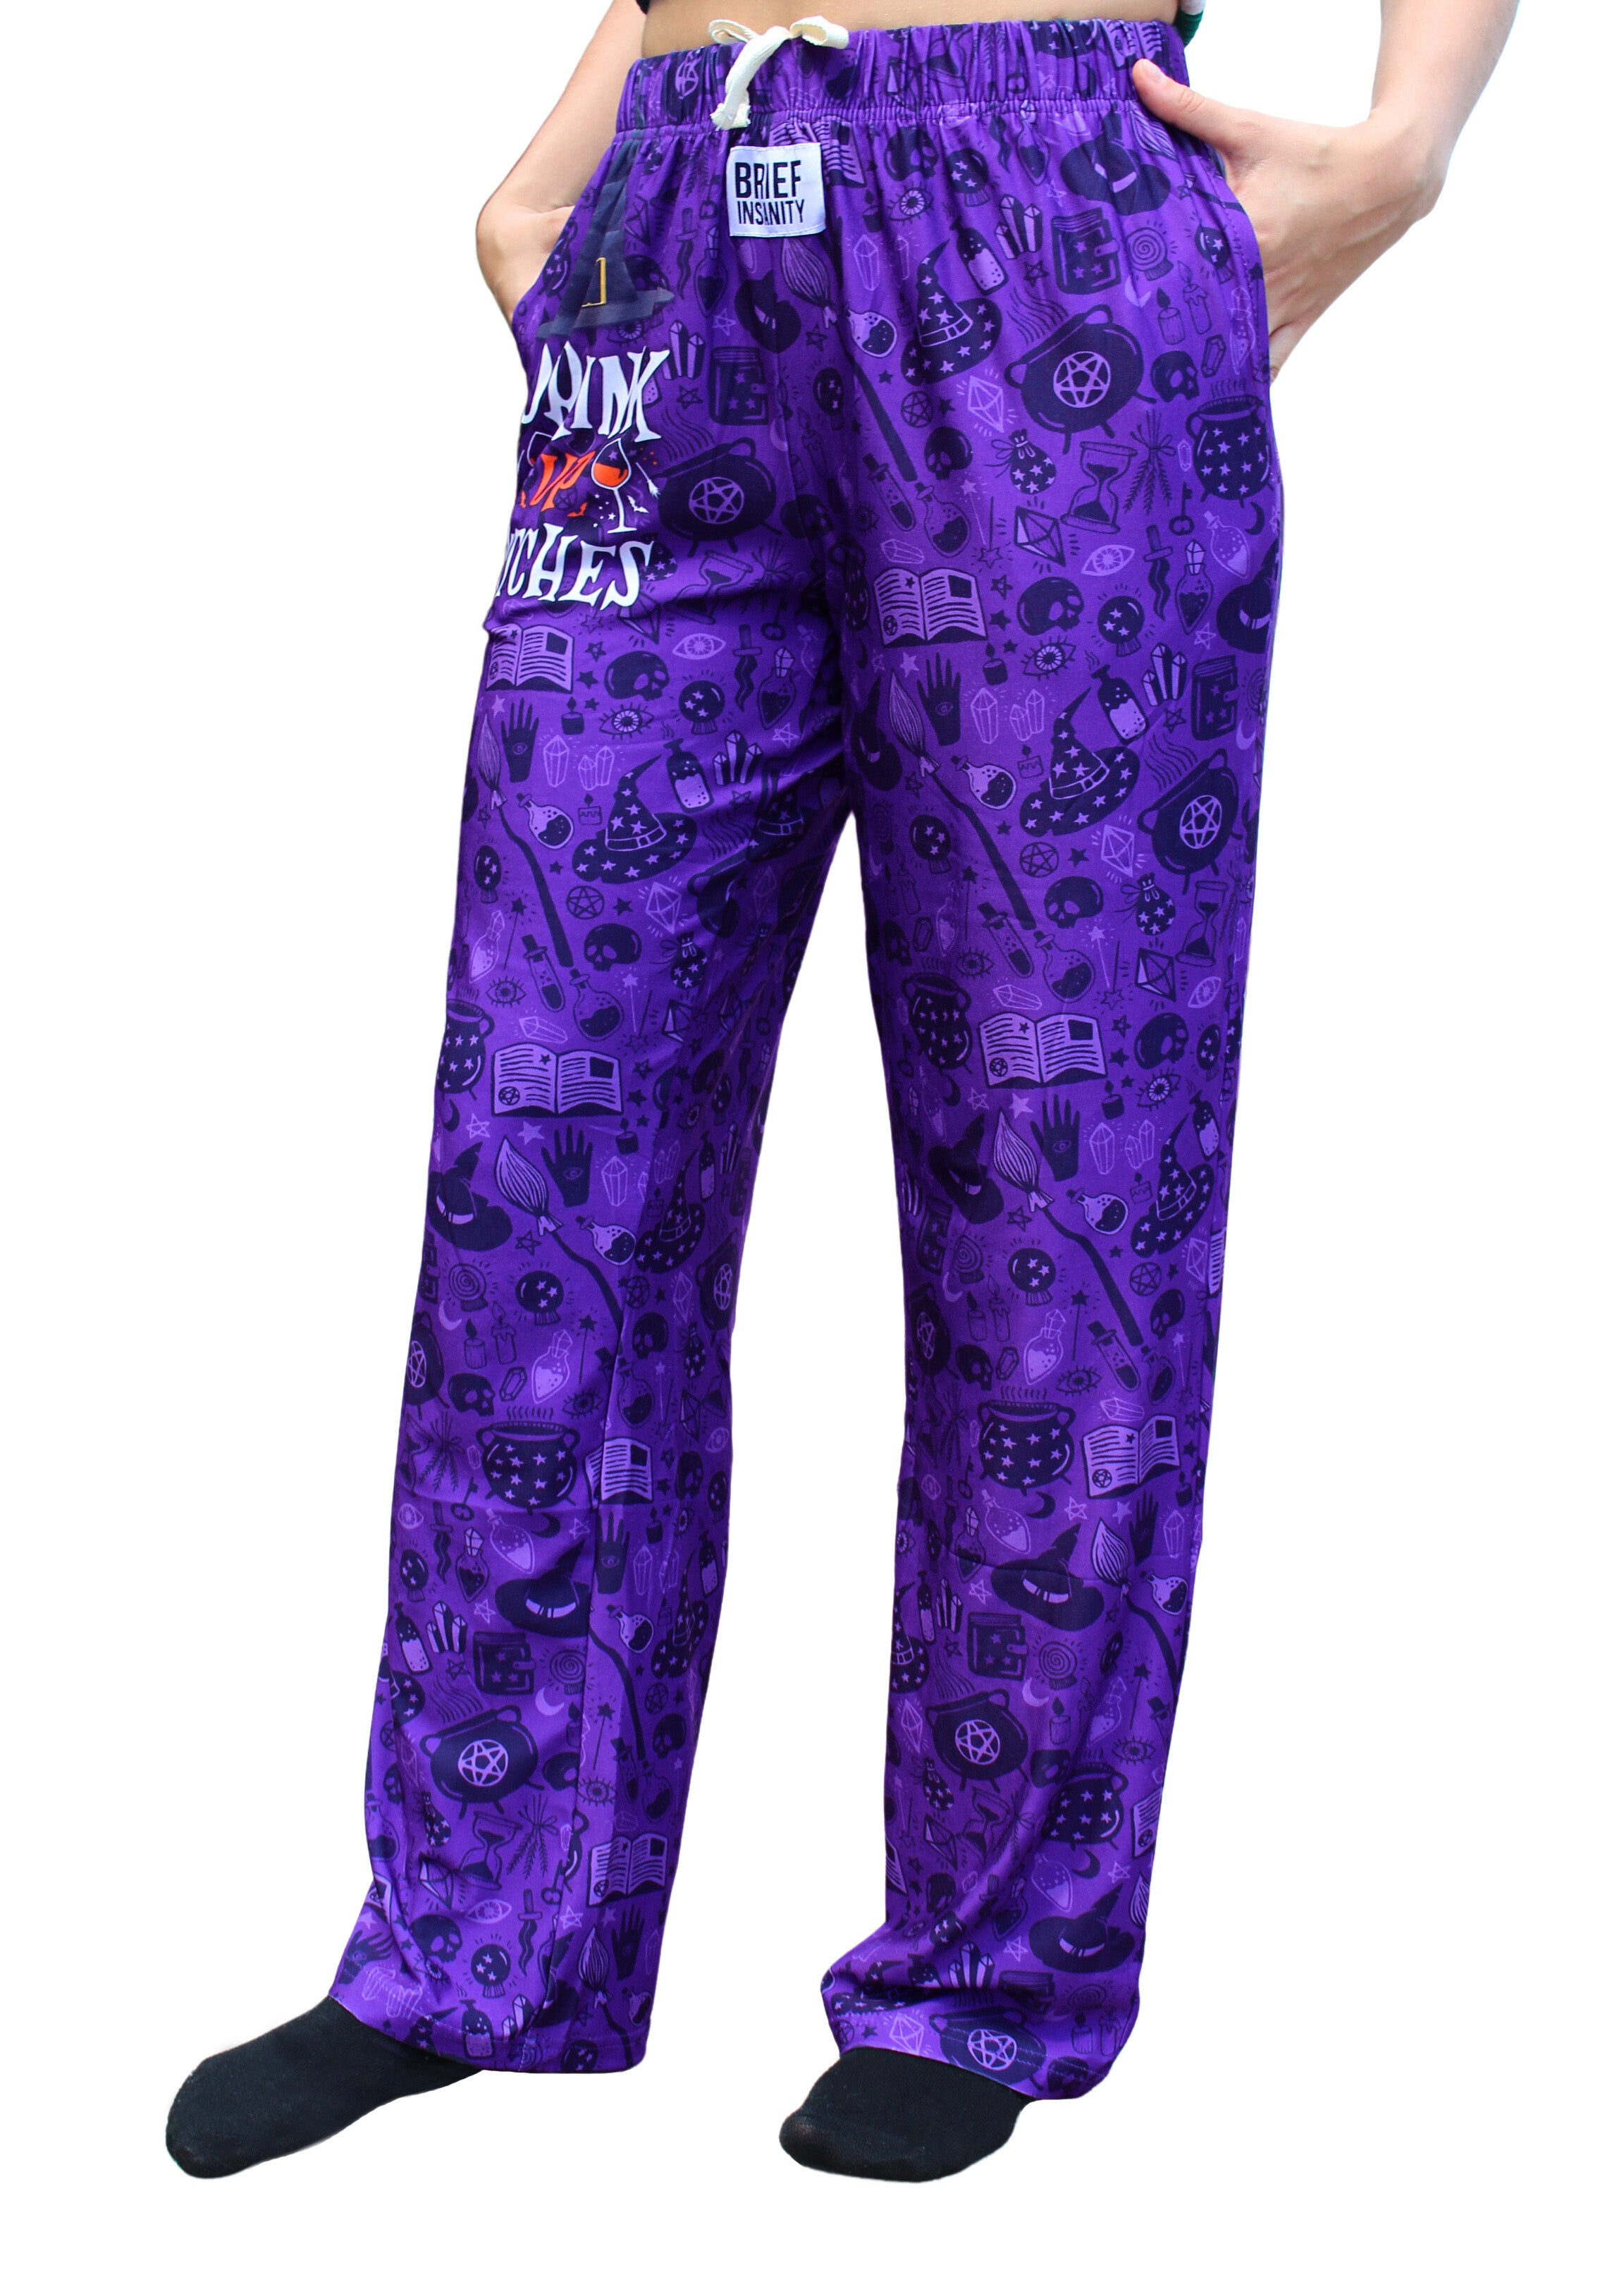 Drink Up Witches Pajama Lounge Pants left side view on model (waist down)